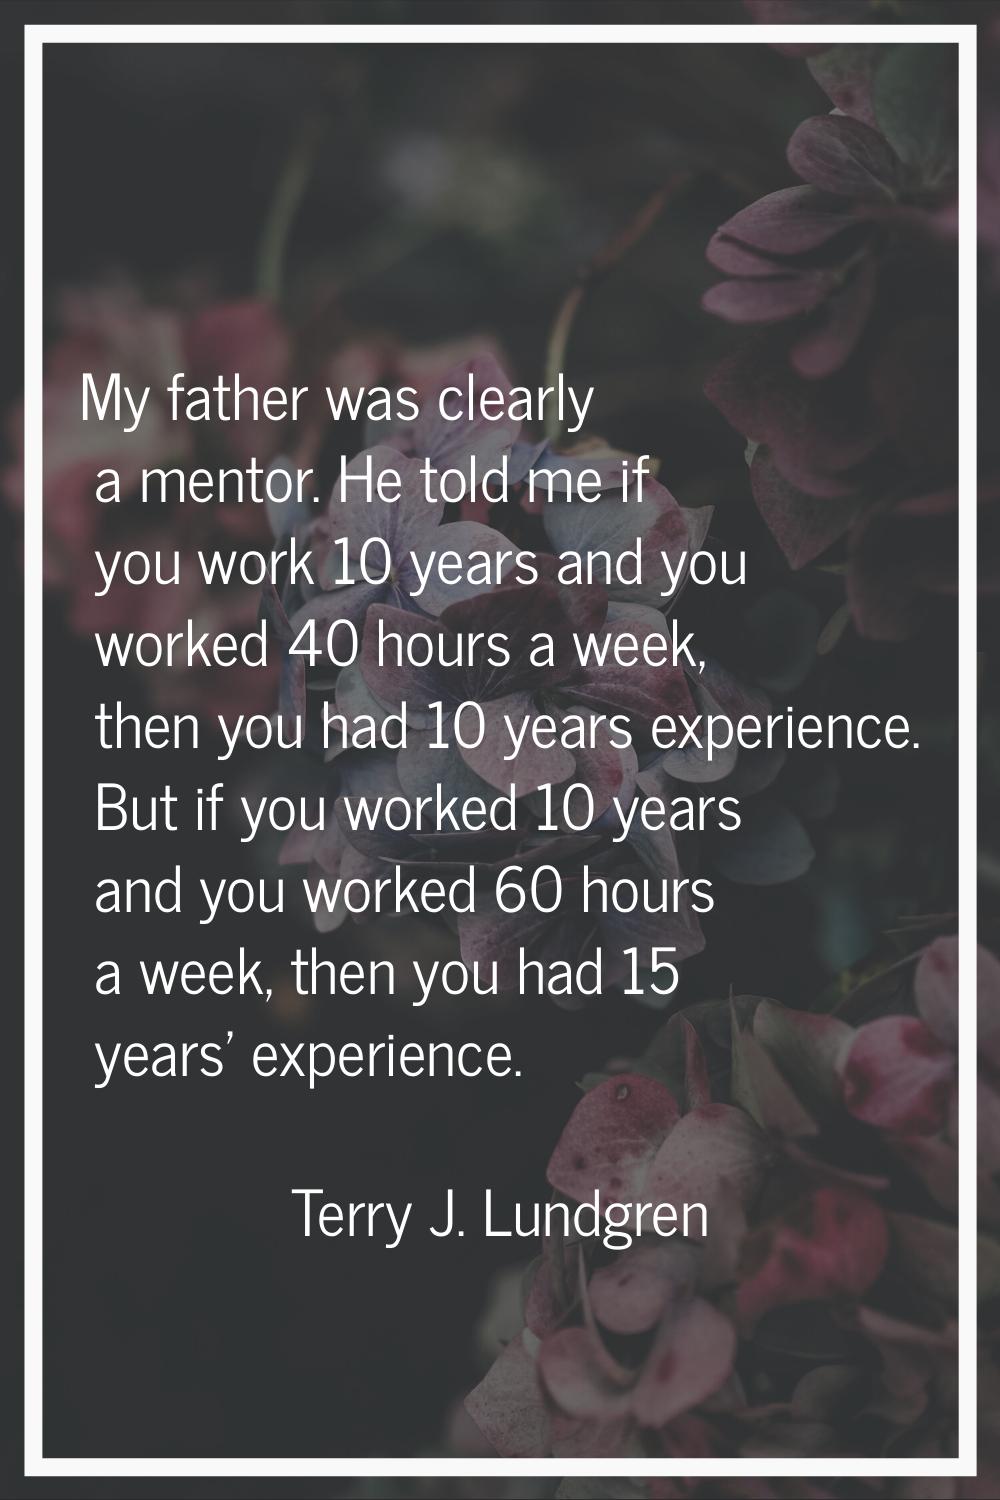 My father was clearly a mentor. He told me if you work 10 years and you worked 40 hours a week, the